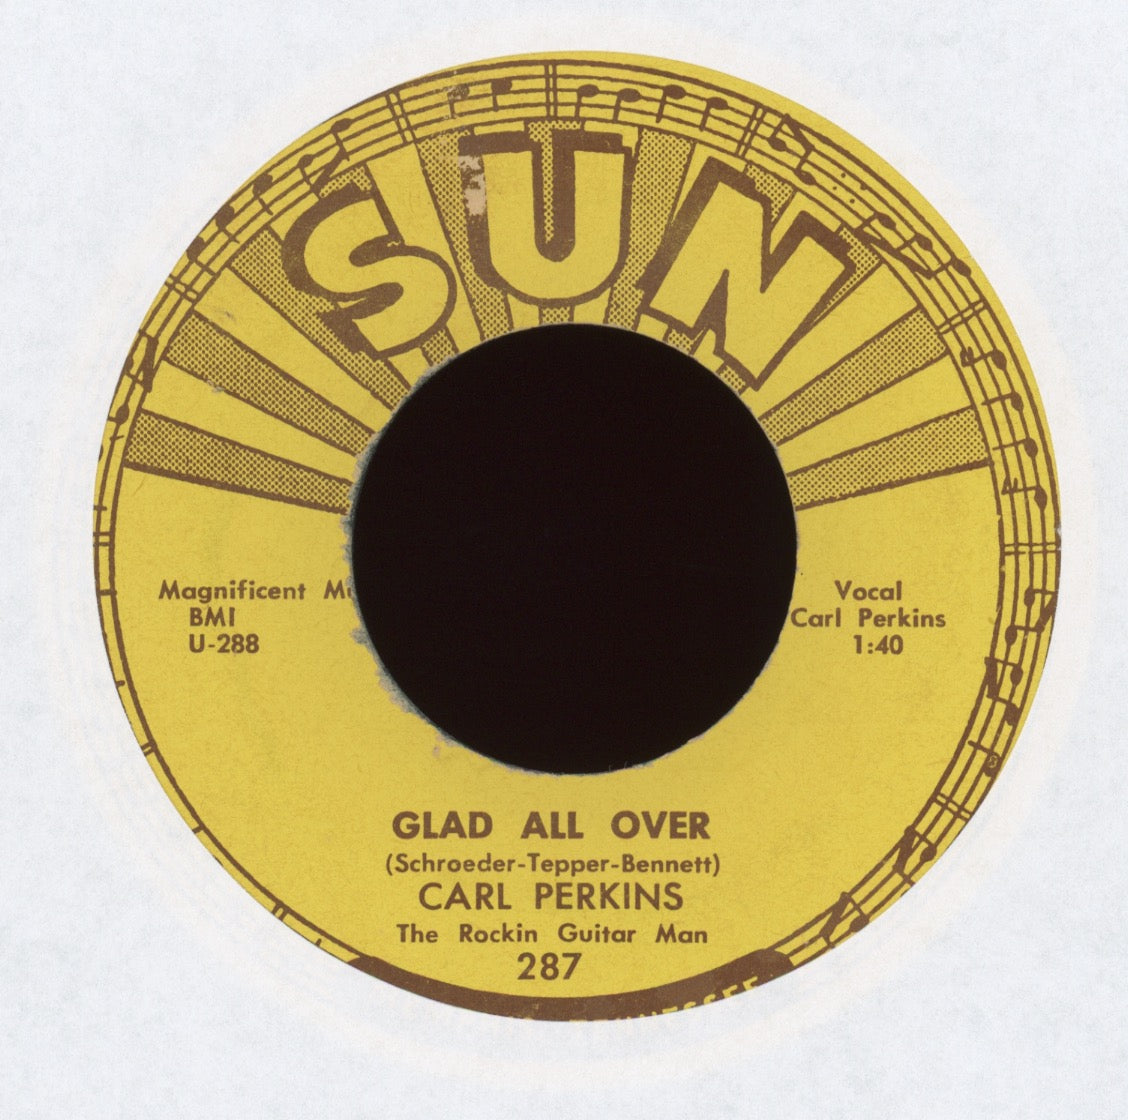 Carl Perkins - Glad All Over on Sun